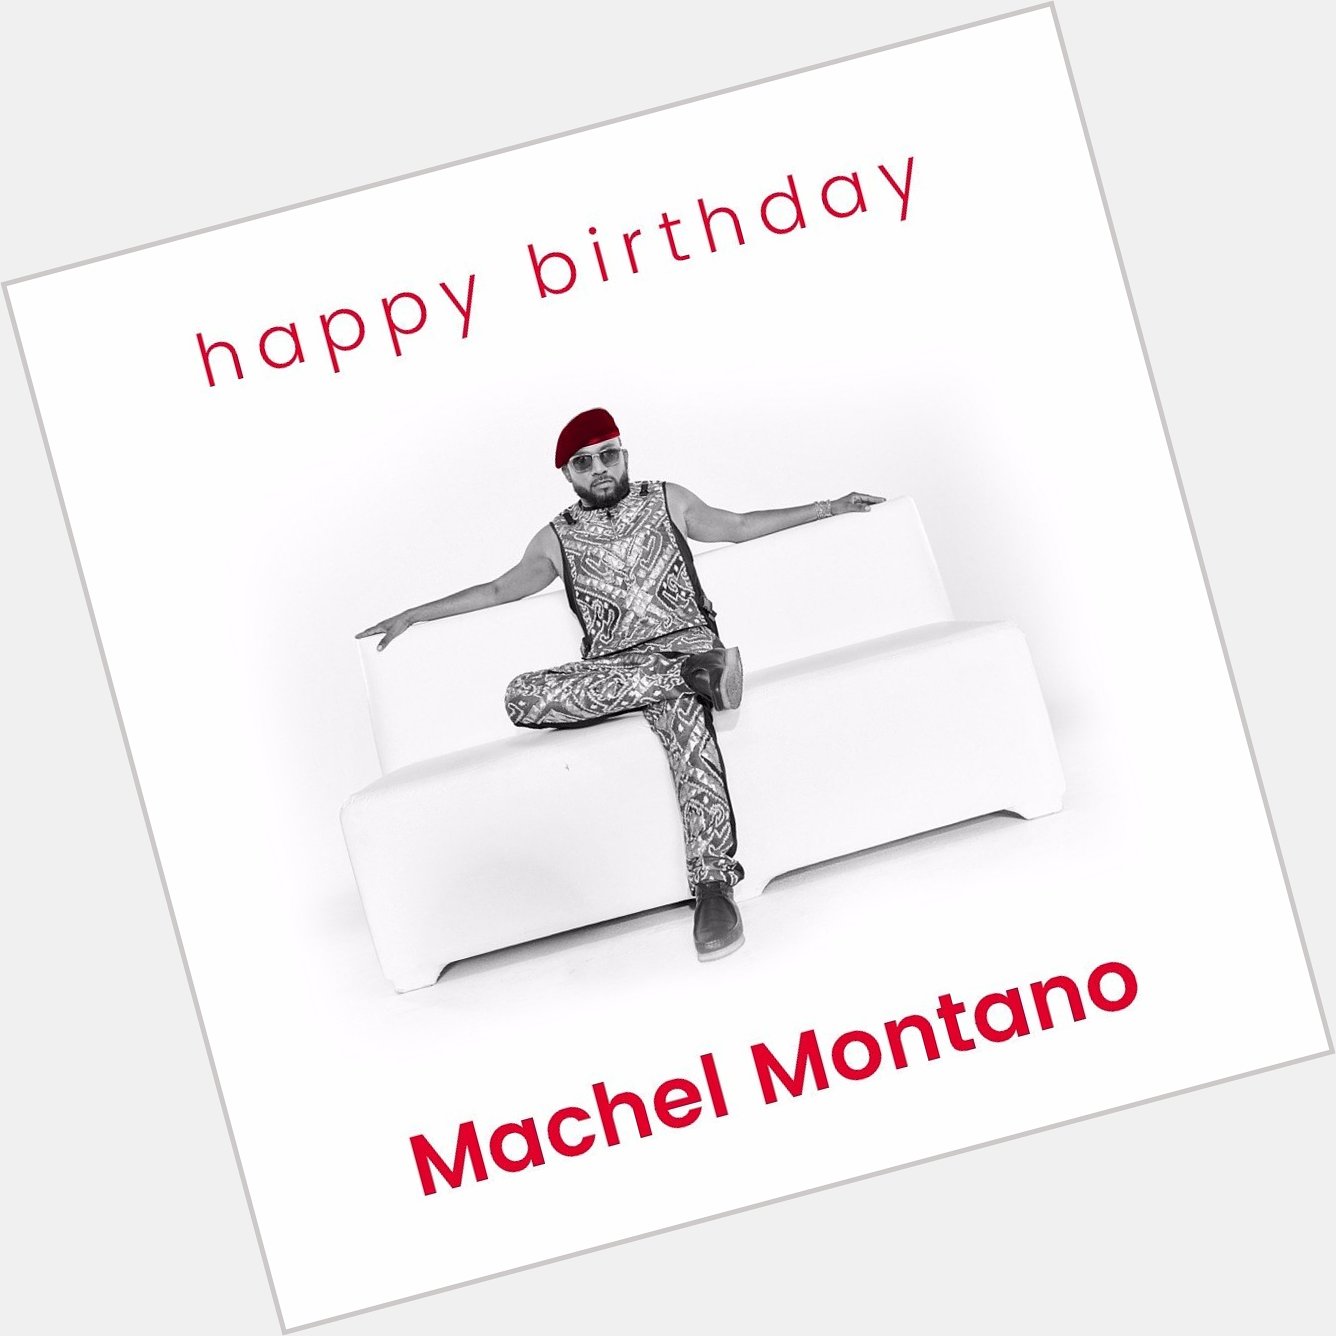 , we say Happy Birthday to the one and only MR.FETE, Machel Montano!    